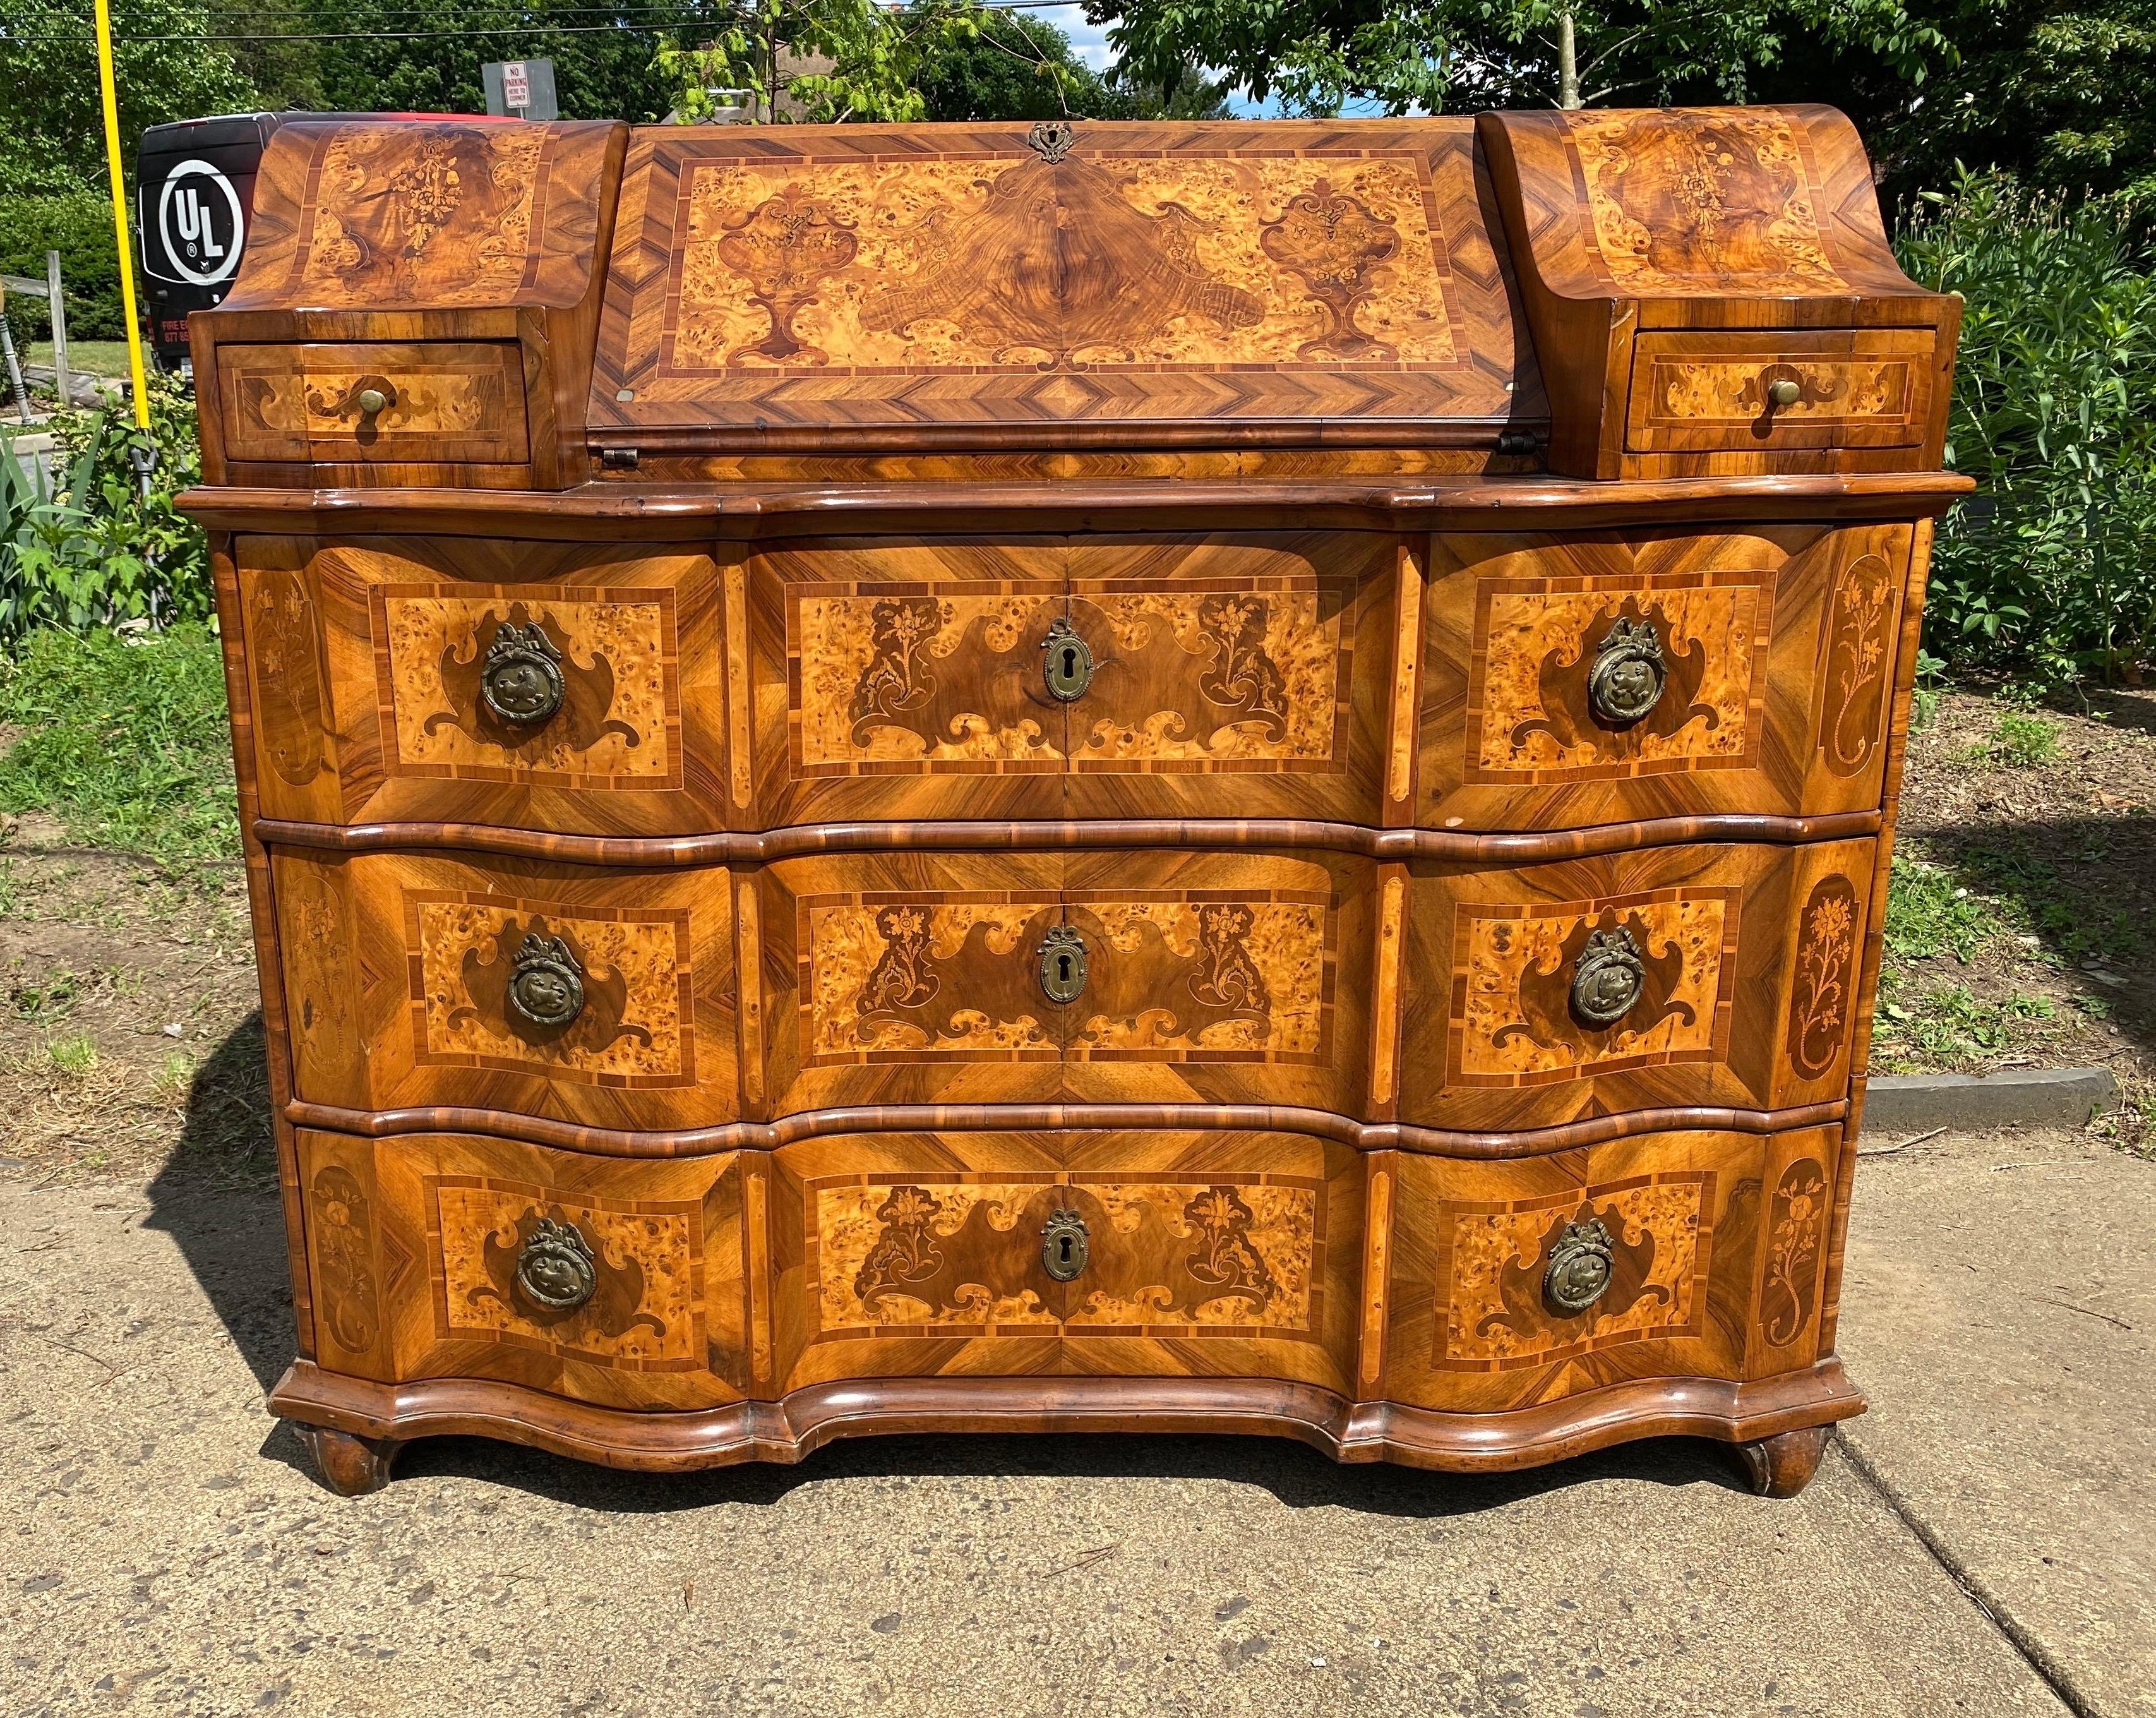 Impressive 18th century northern Italian inlaid bureau with secretary desk. Incredible inlay work with walnut, burl walnut, olive wood and other exotic imported veneers. 3 drawers beneath the fall front desk. The desk is flanked on either side with